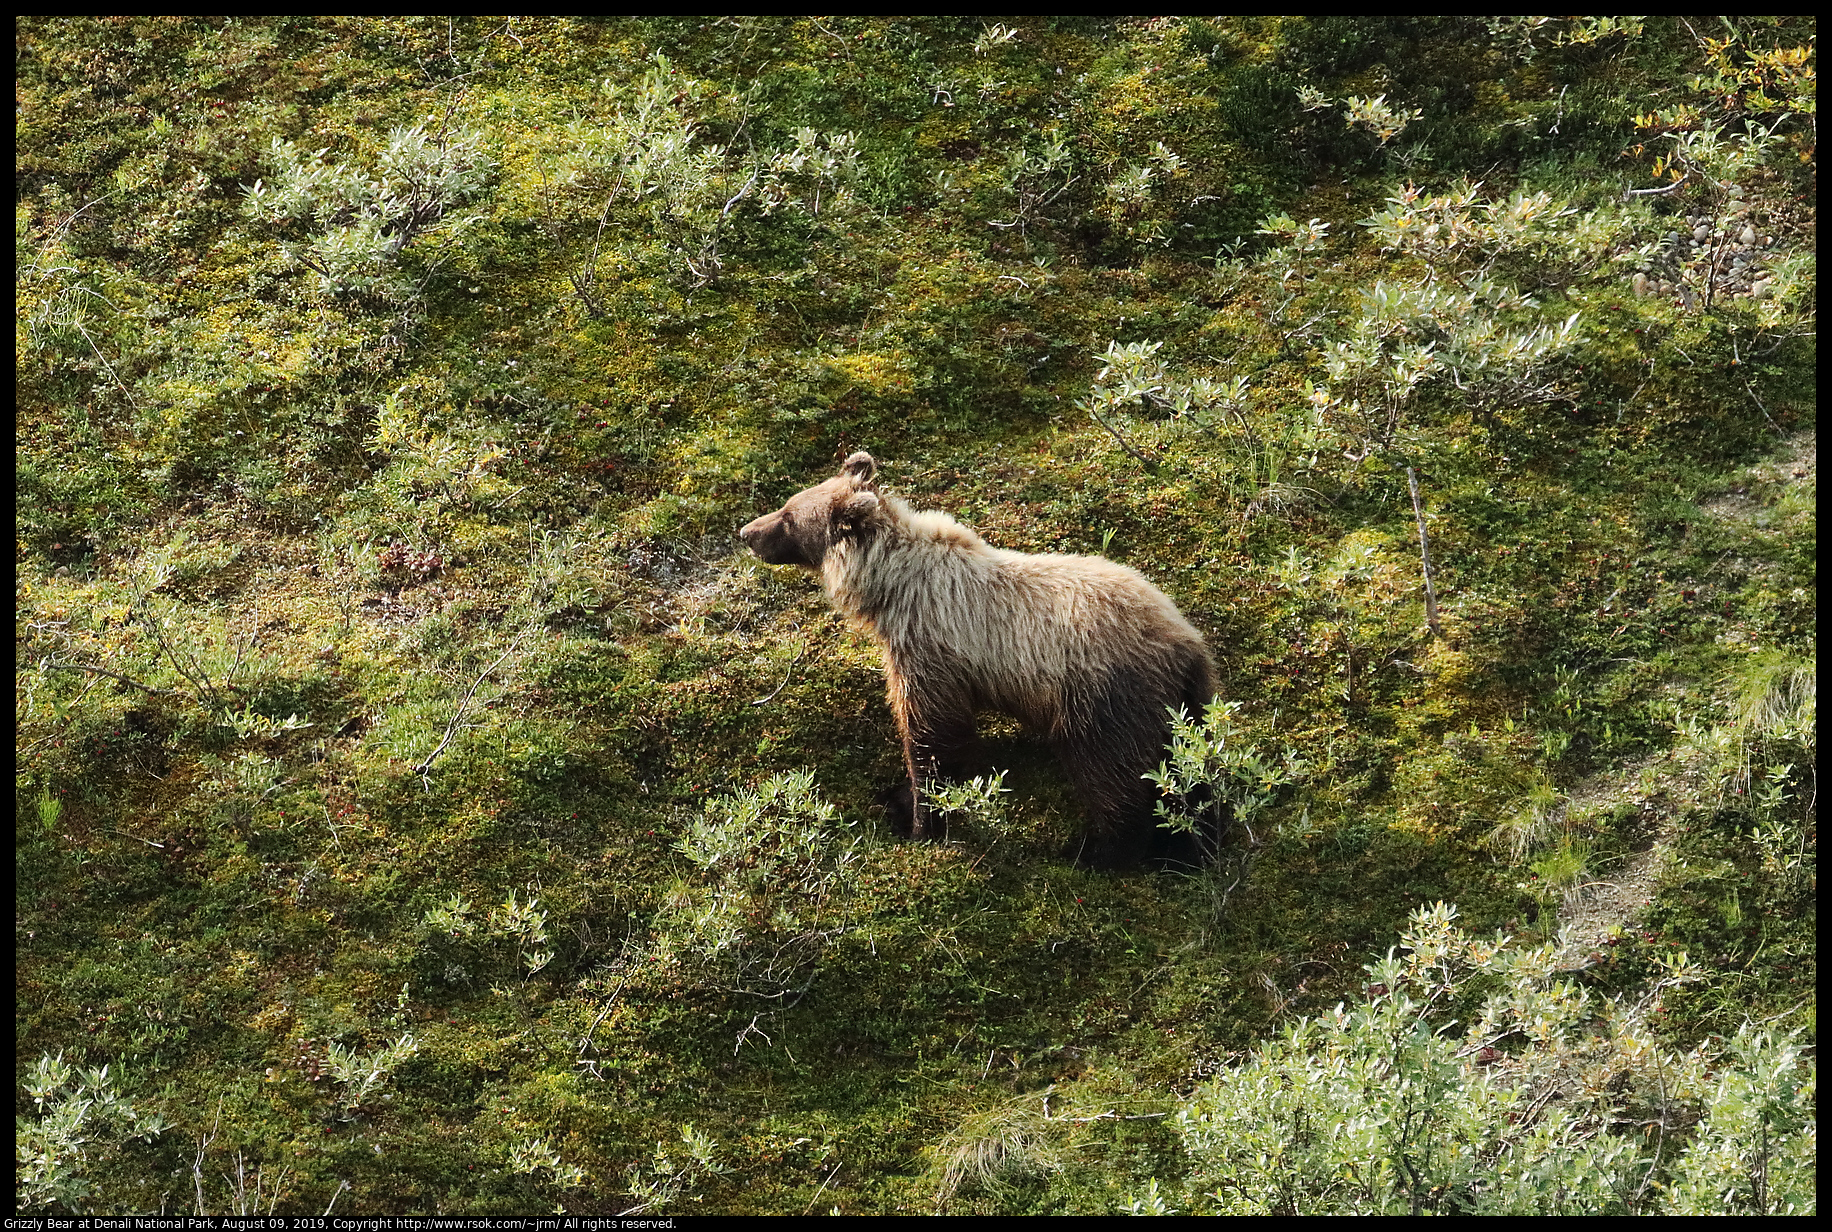 Grizzly Bear at Denali National Park, August 09, 2019